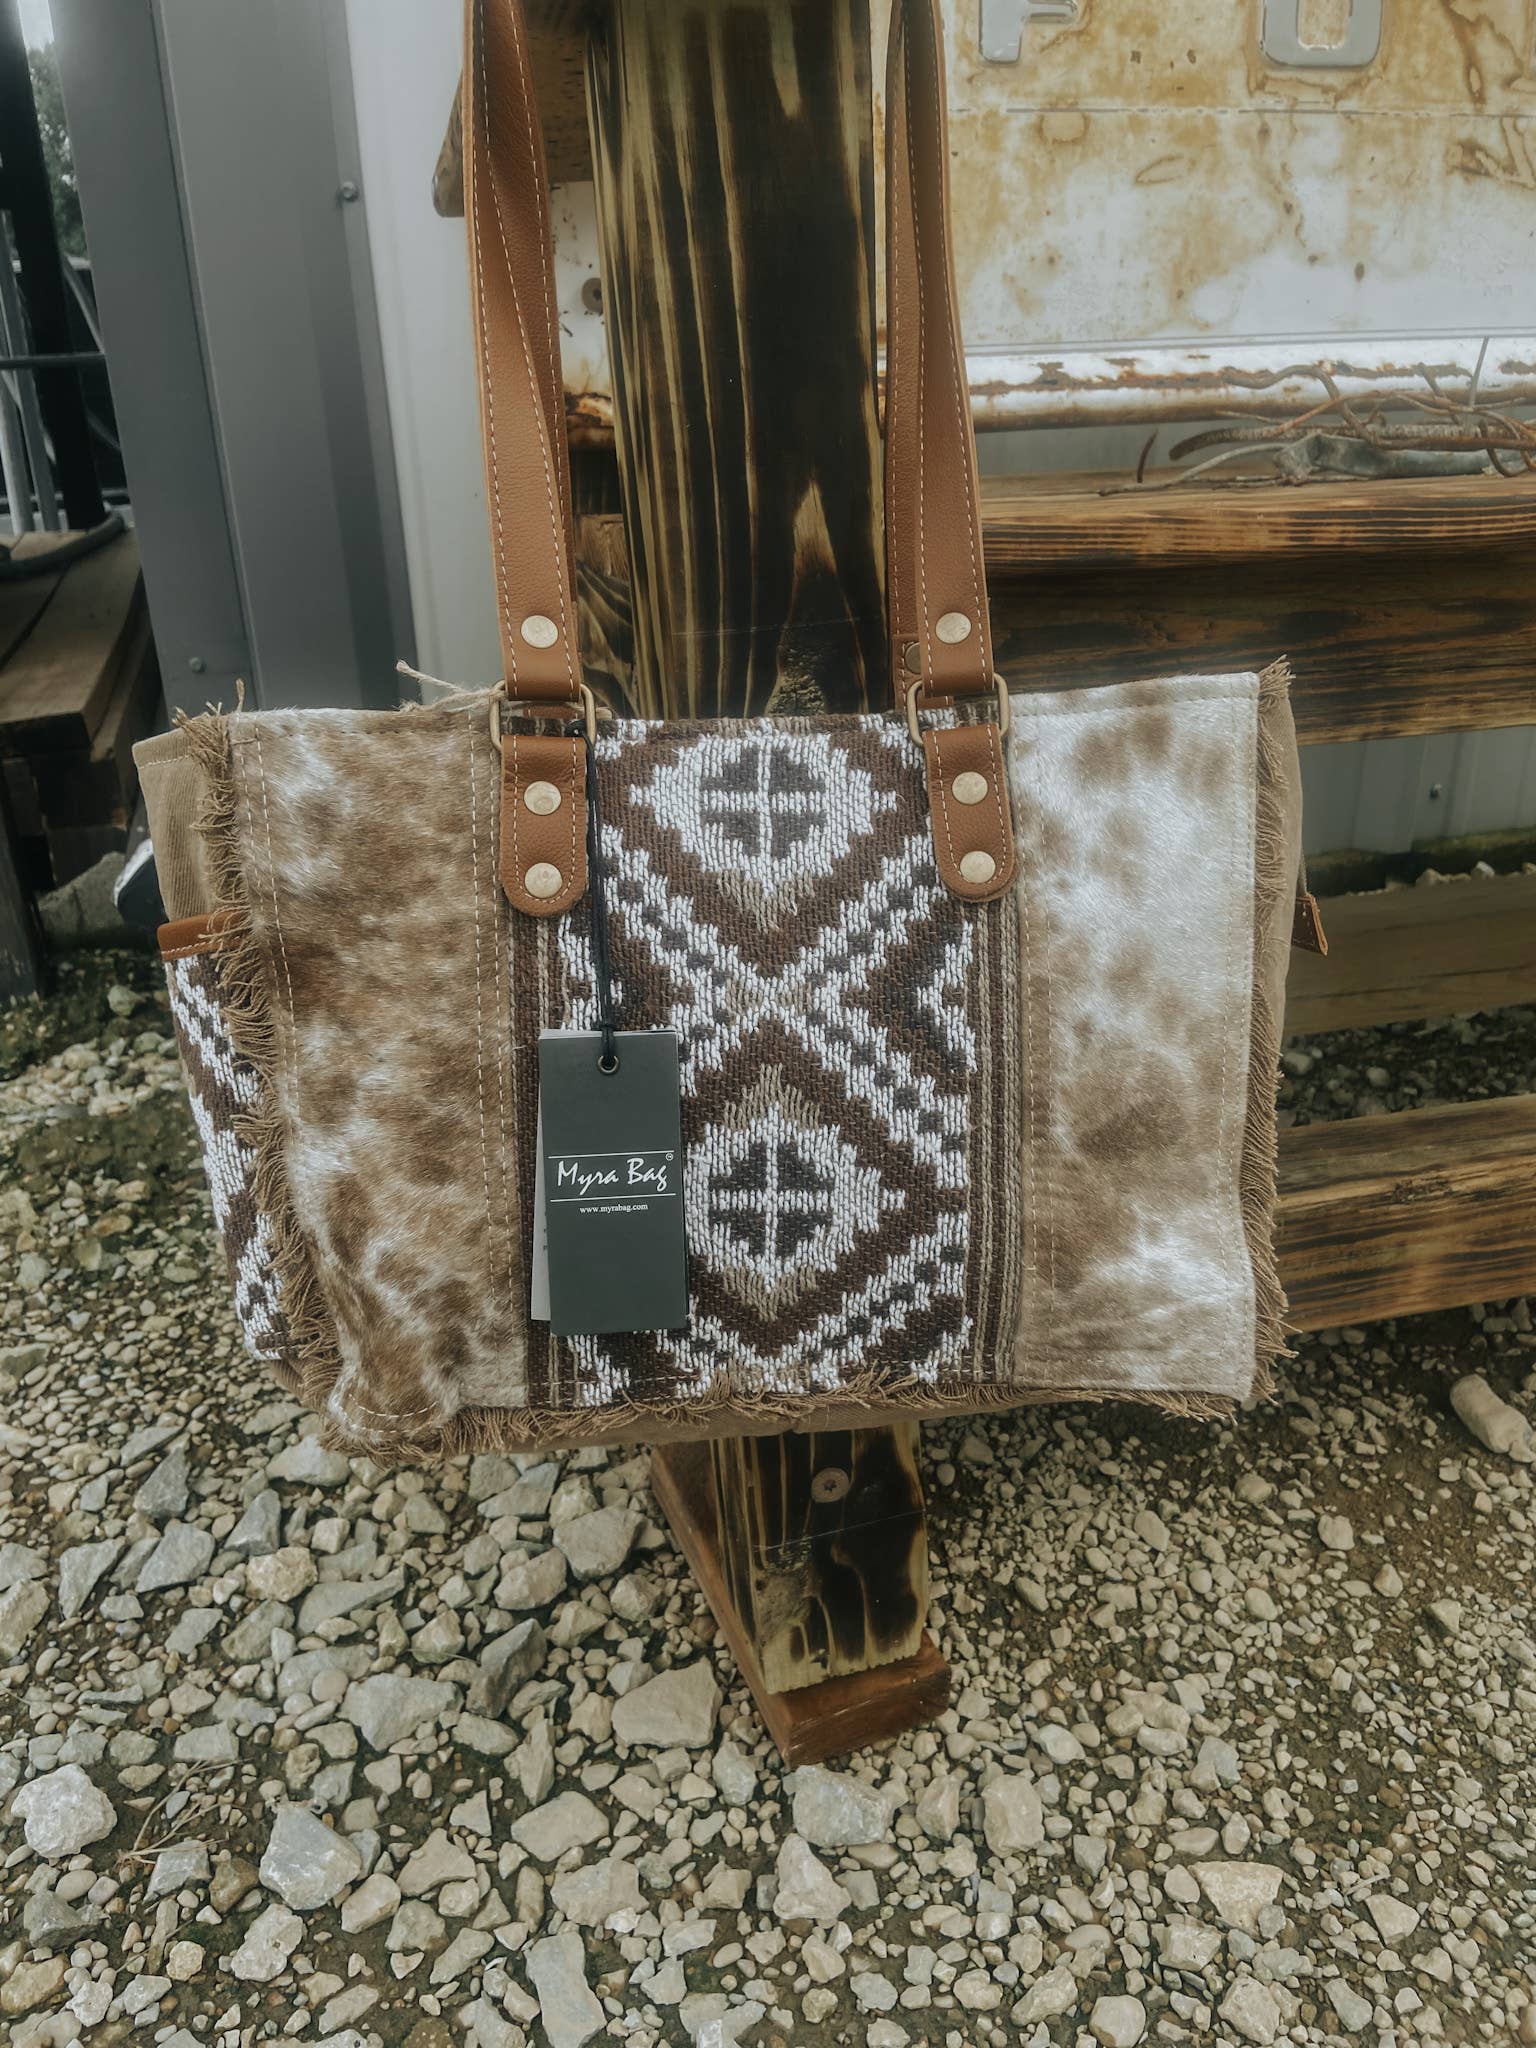 COWHIDE COLLECTION – Cutting Edge Country